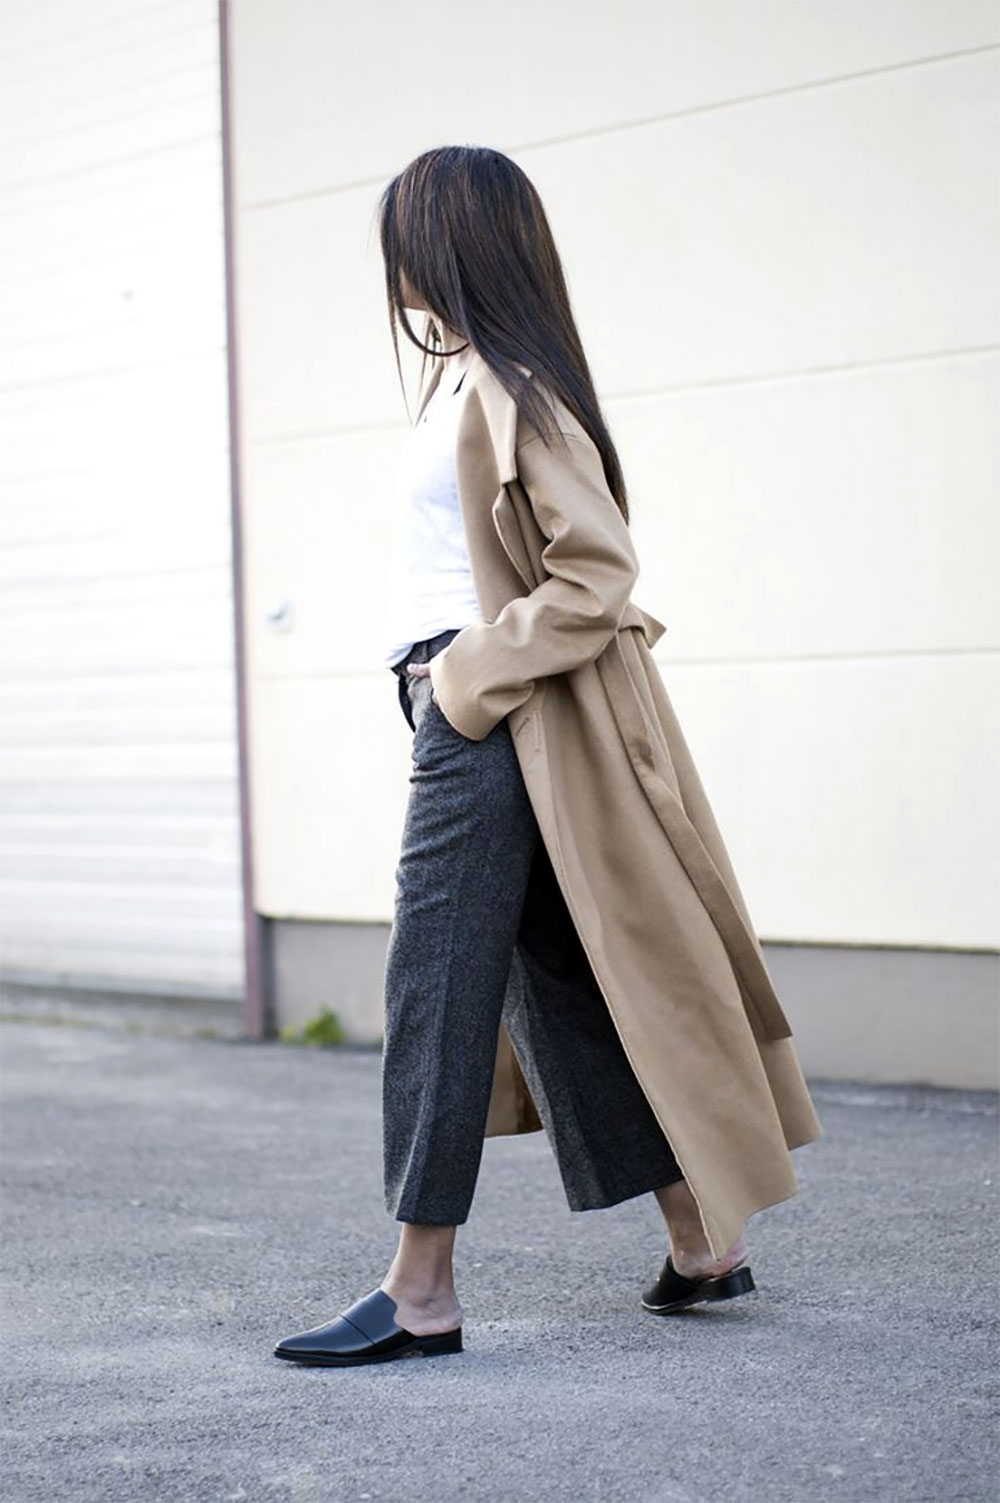 backless shoes daily outfit